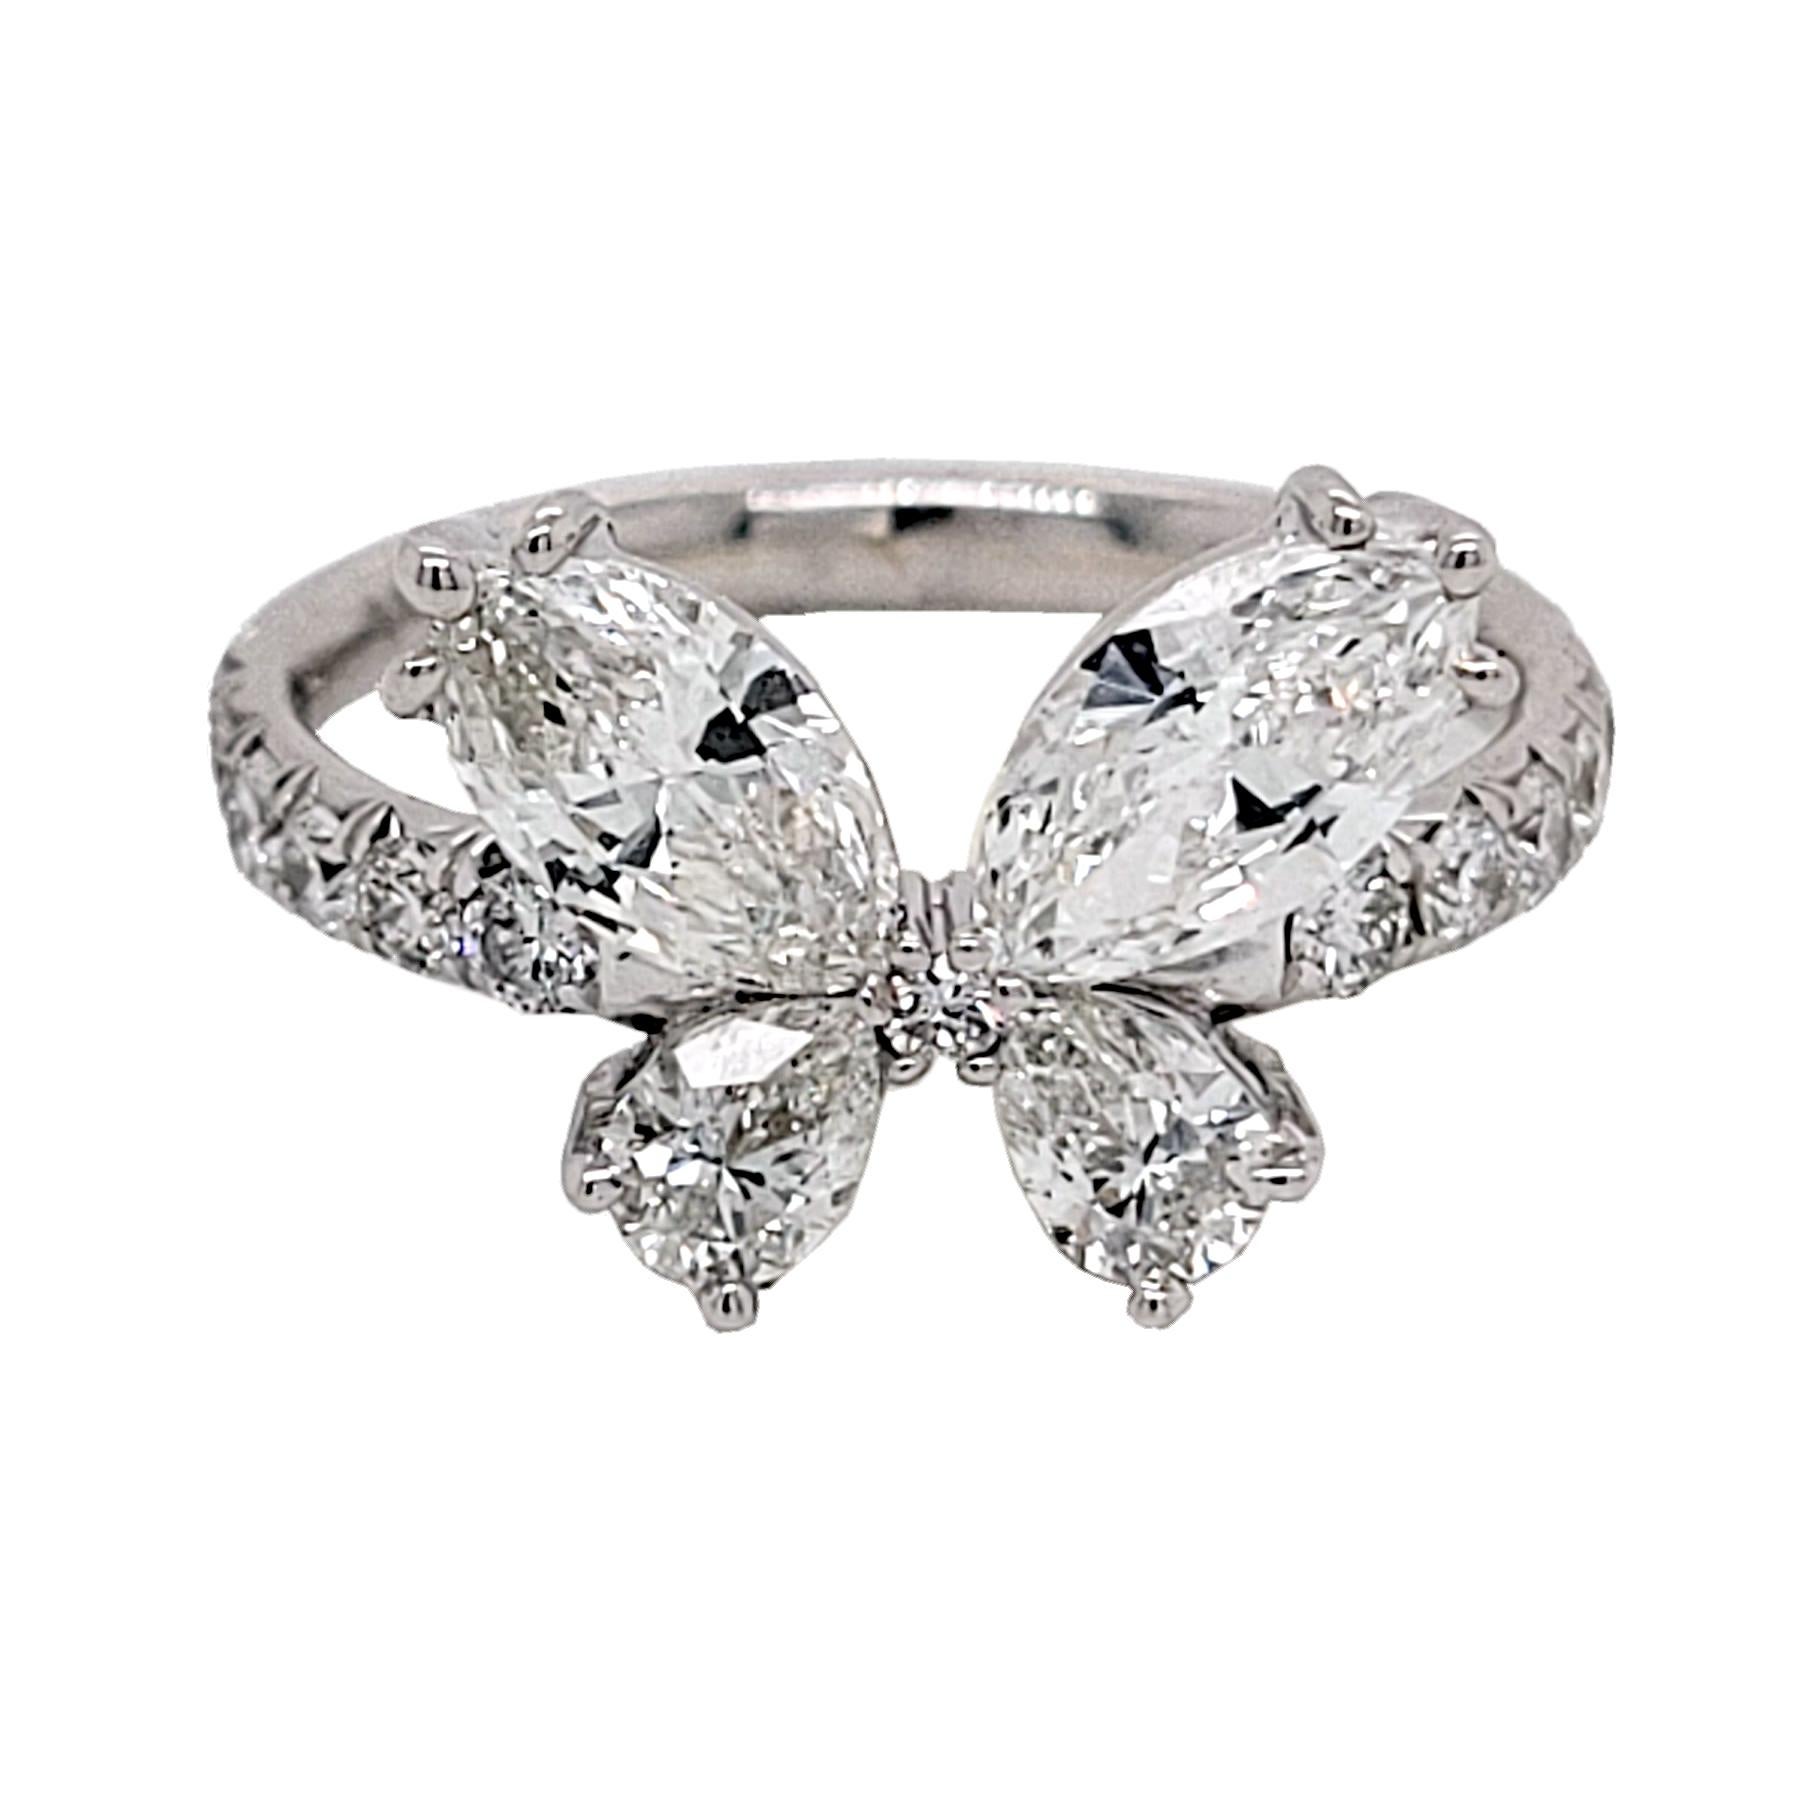 Five perfectly Match Diamonds at the top assemble into a Butterfly shape set on top of French Pave Set Shank.  This beautiful fun ring made if 18K White Gold.
Stones:
Diamonds: 2 Marquise Shaped (TW:1.03 Ct) and 2 Pear Shaped Diamonds (TW:0.38 Ct)